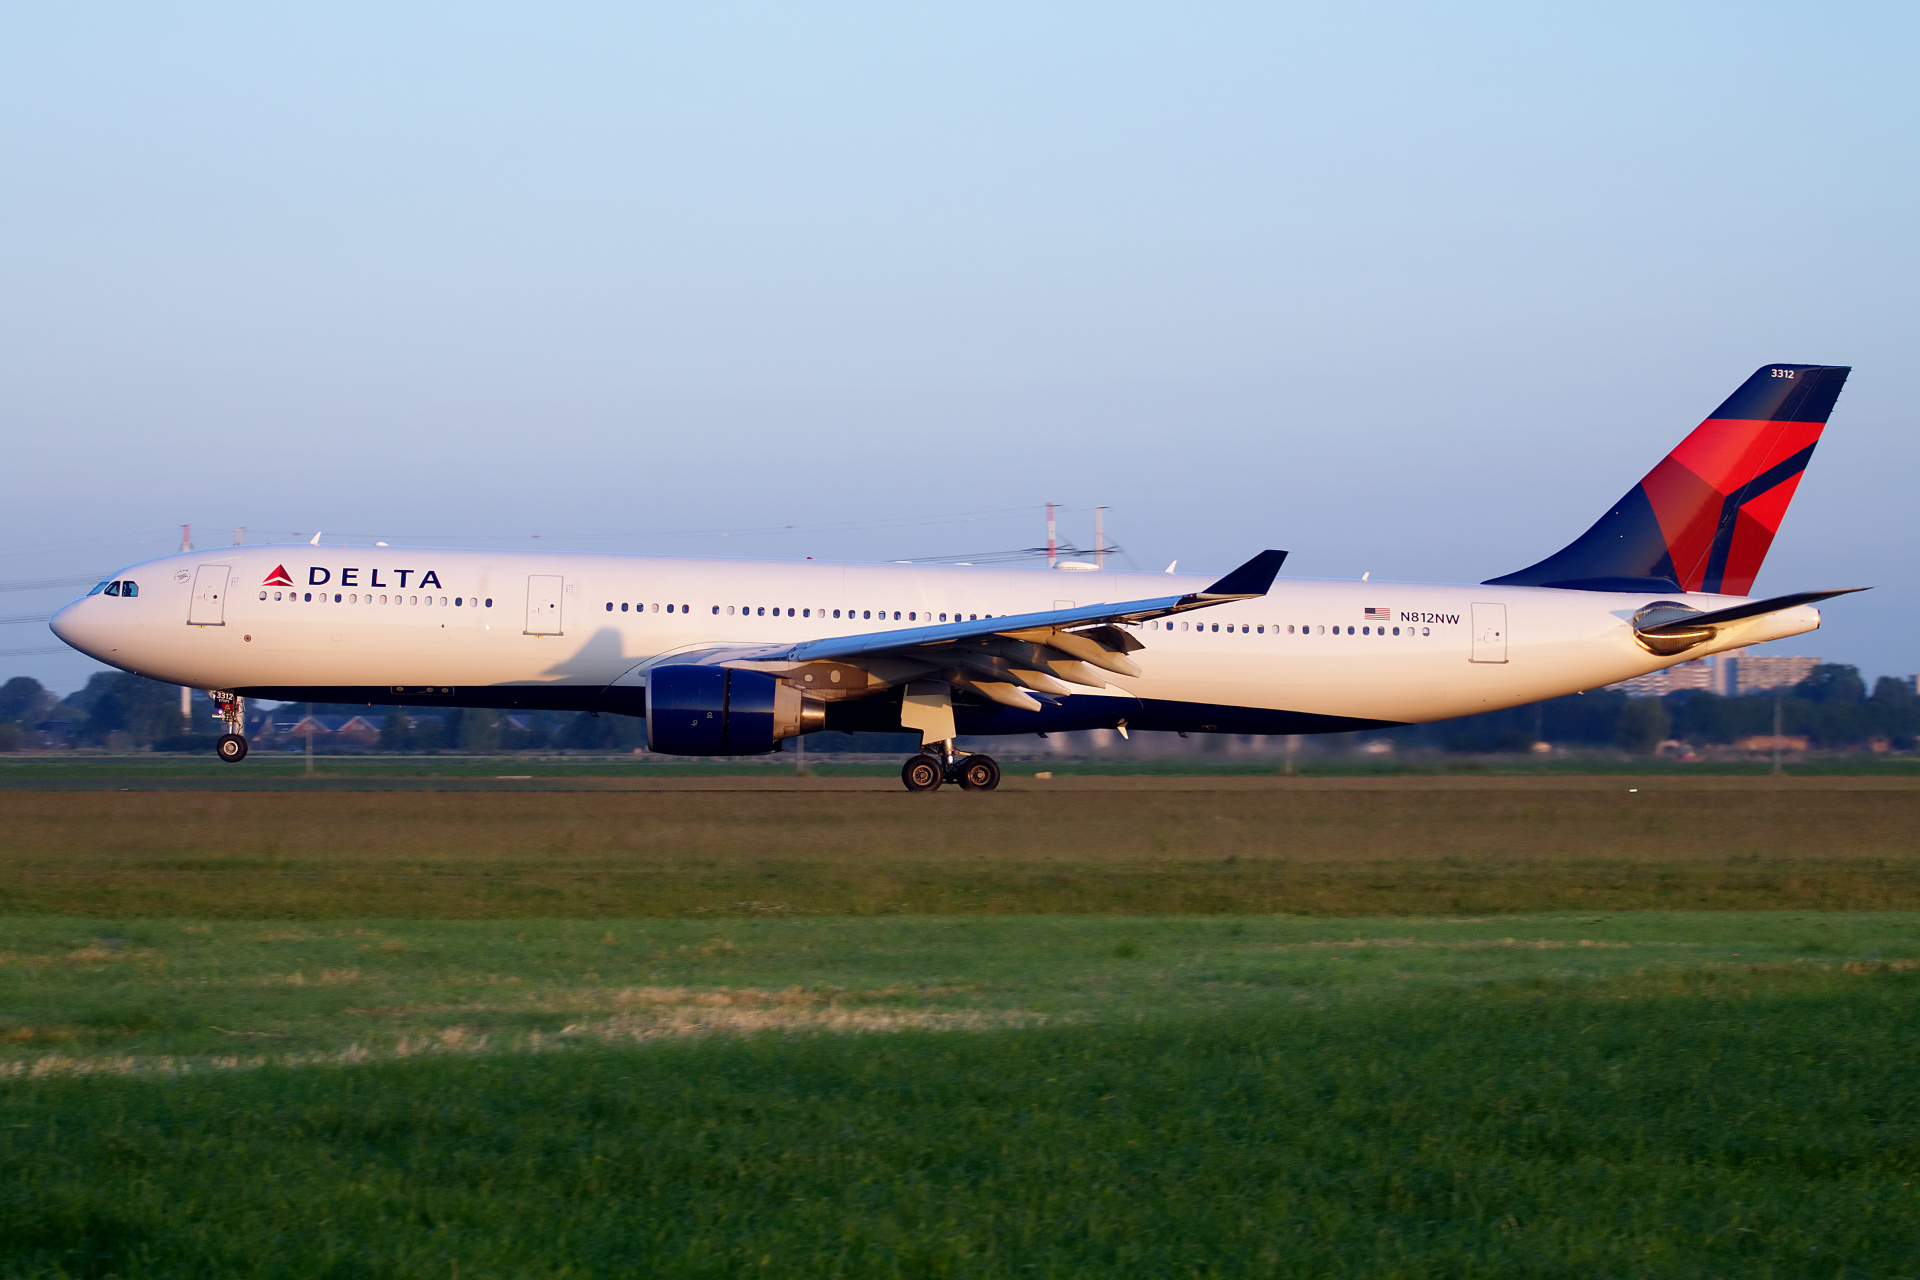 N812NW (Aircraft » Schiphol Spotting » Airbus A330-300 » Delta Airlines)